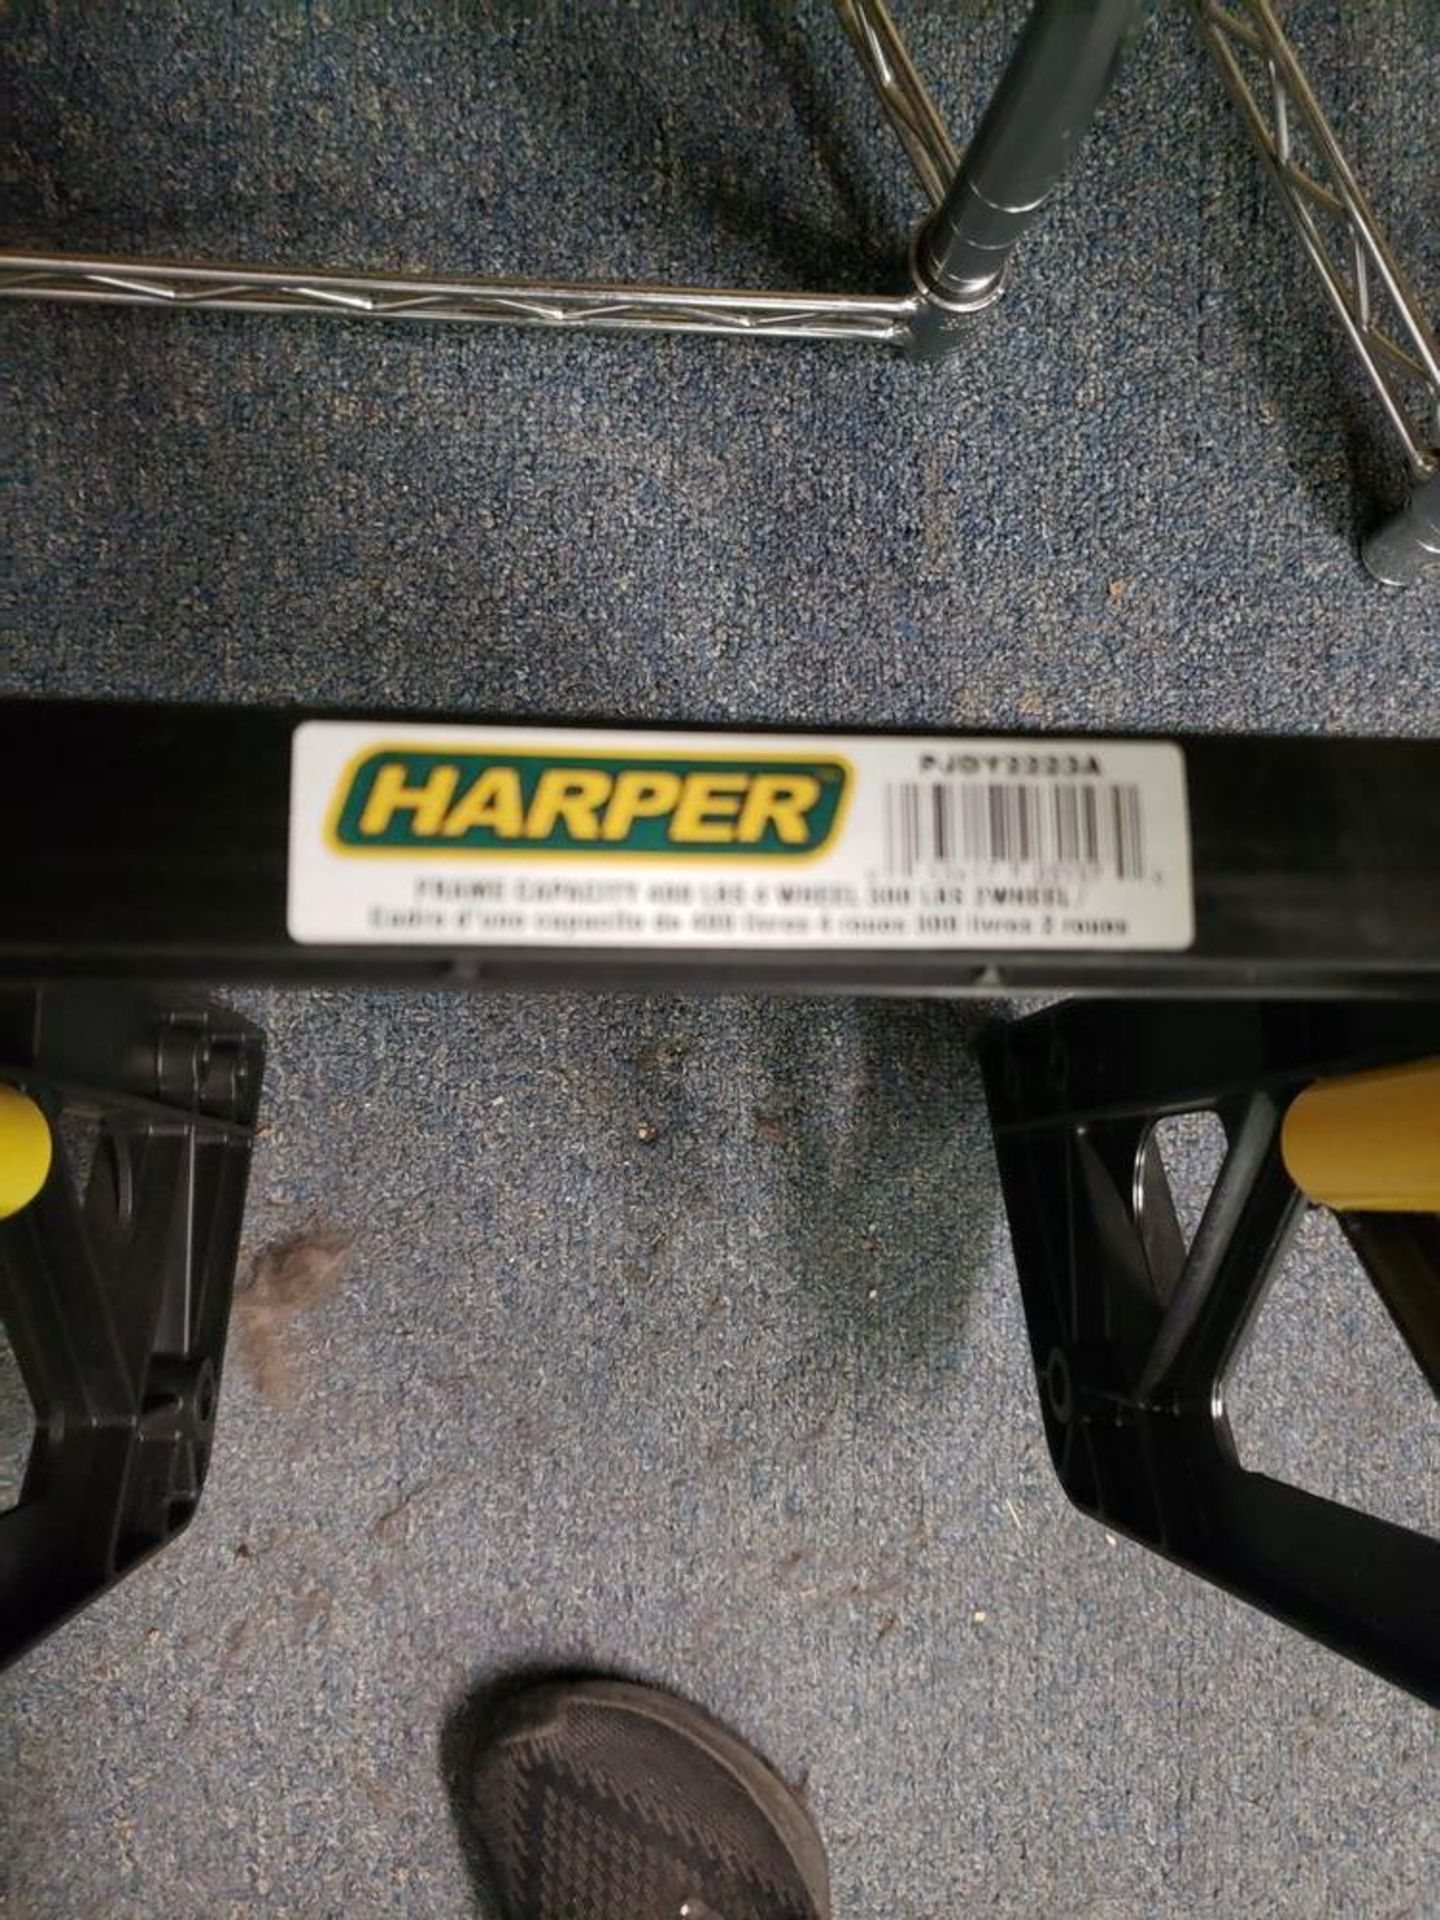 NEW 2 WHEEL DOLLY BY HARPER - Image 2 of 3